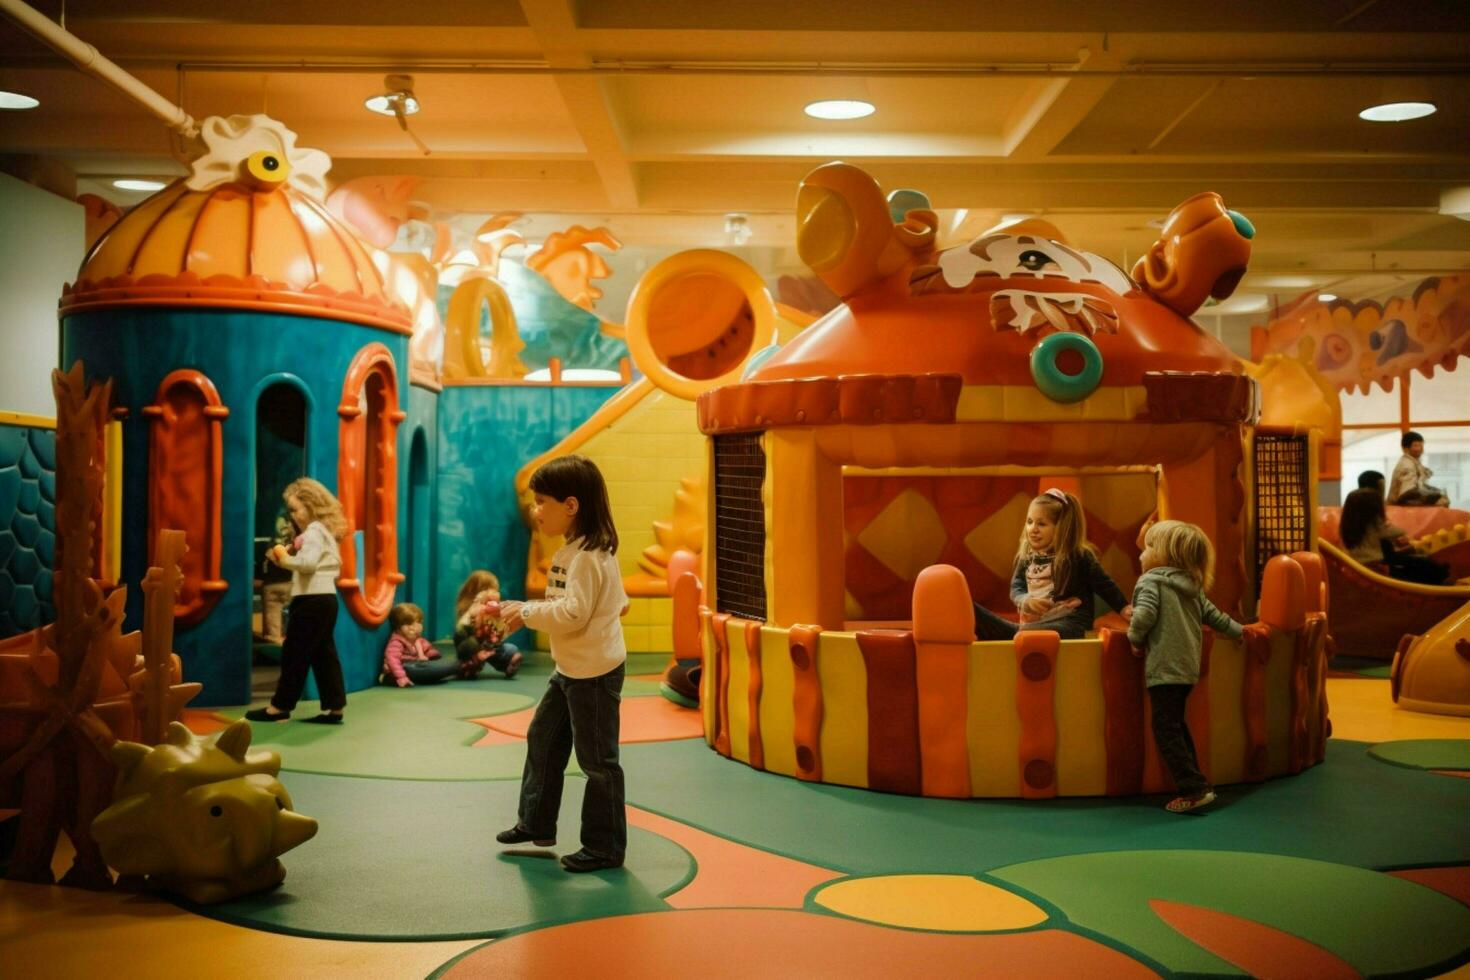 Kids enjoying a day at an indoor playground photo